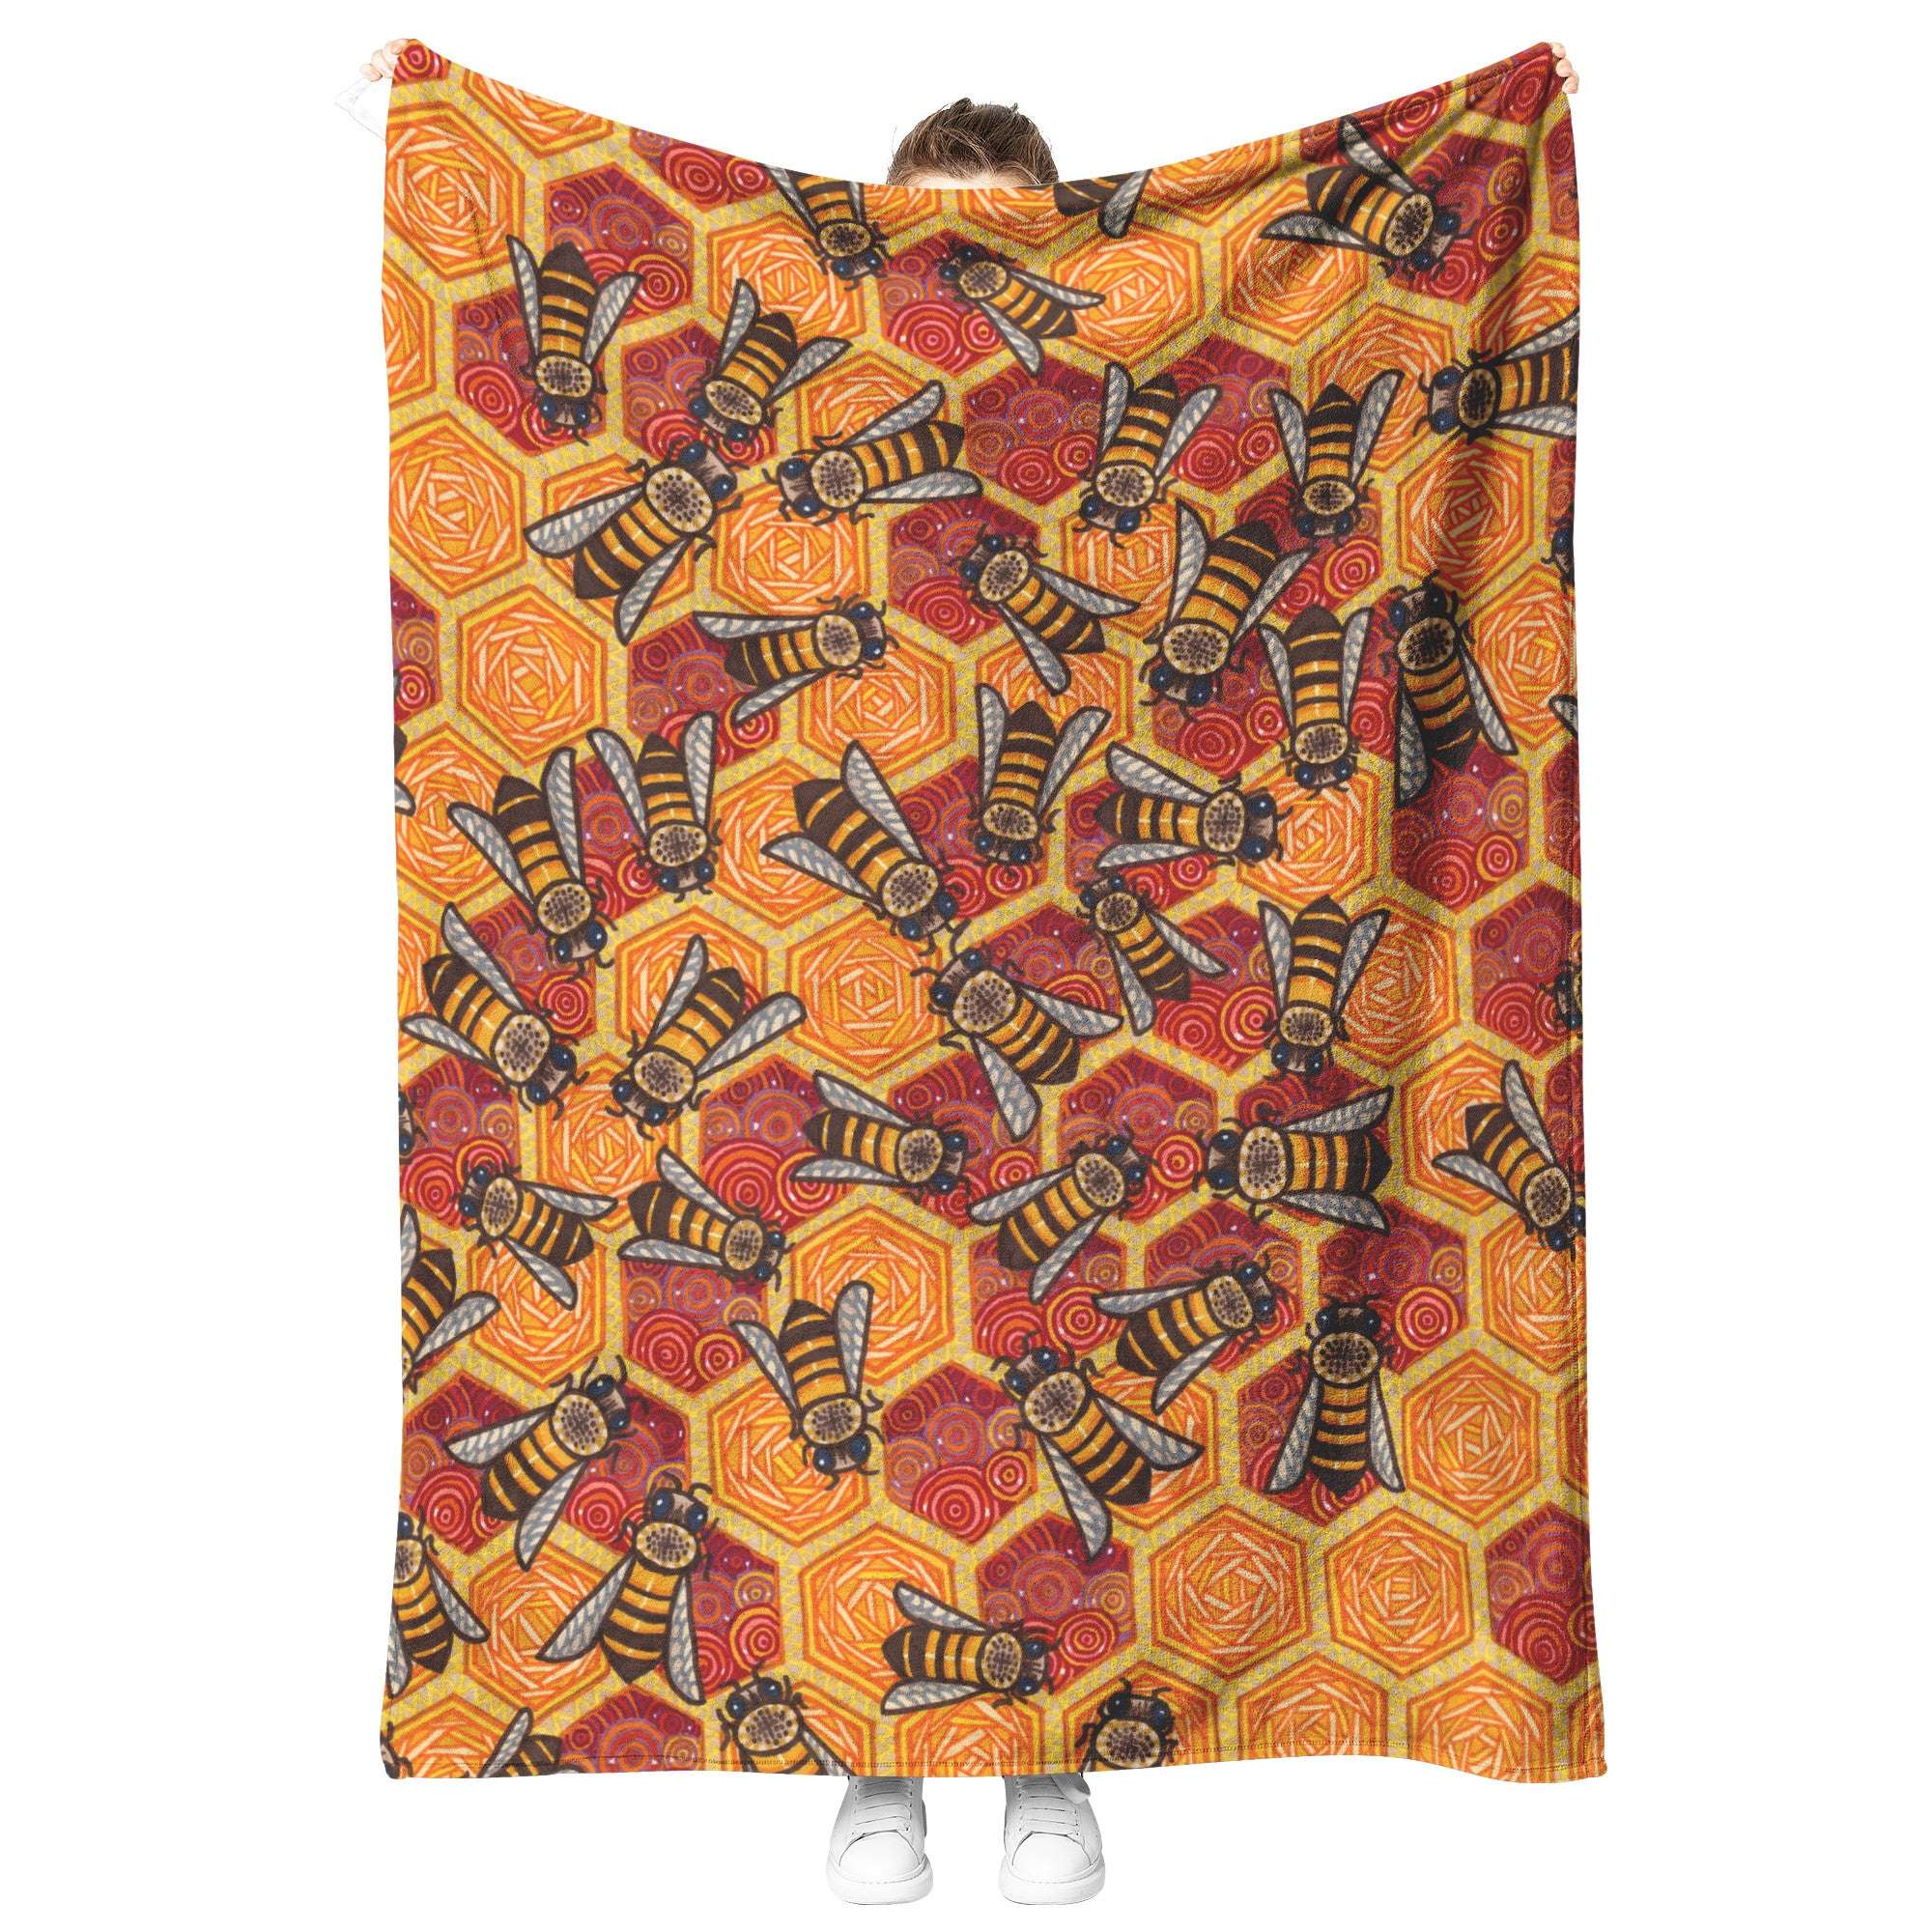 A person holding up a Honeycomb Harmony Blanket with a colorful geometric and bee pattern.